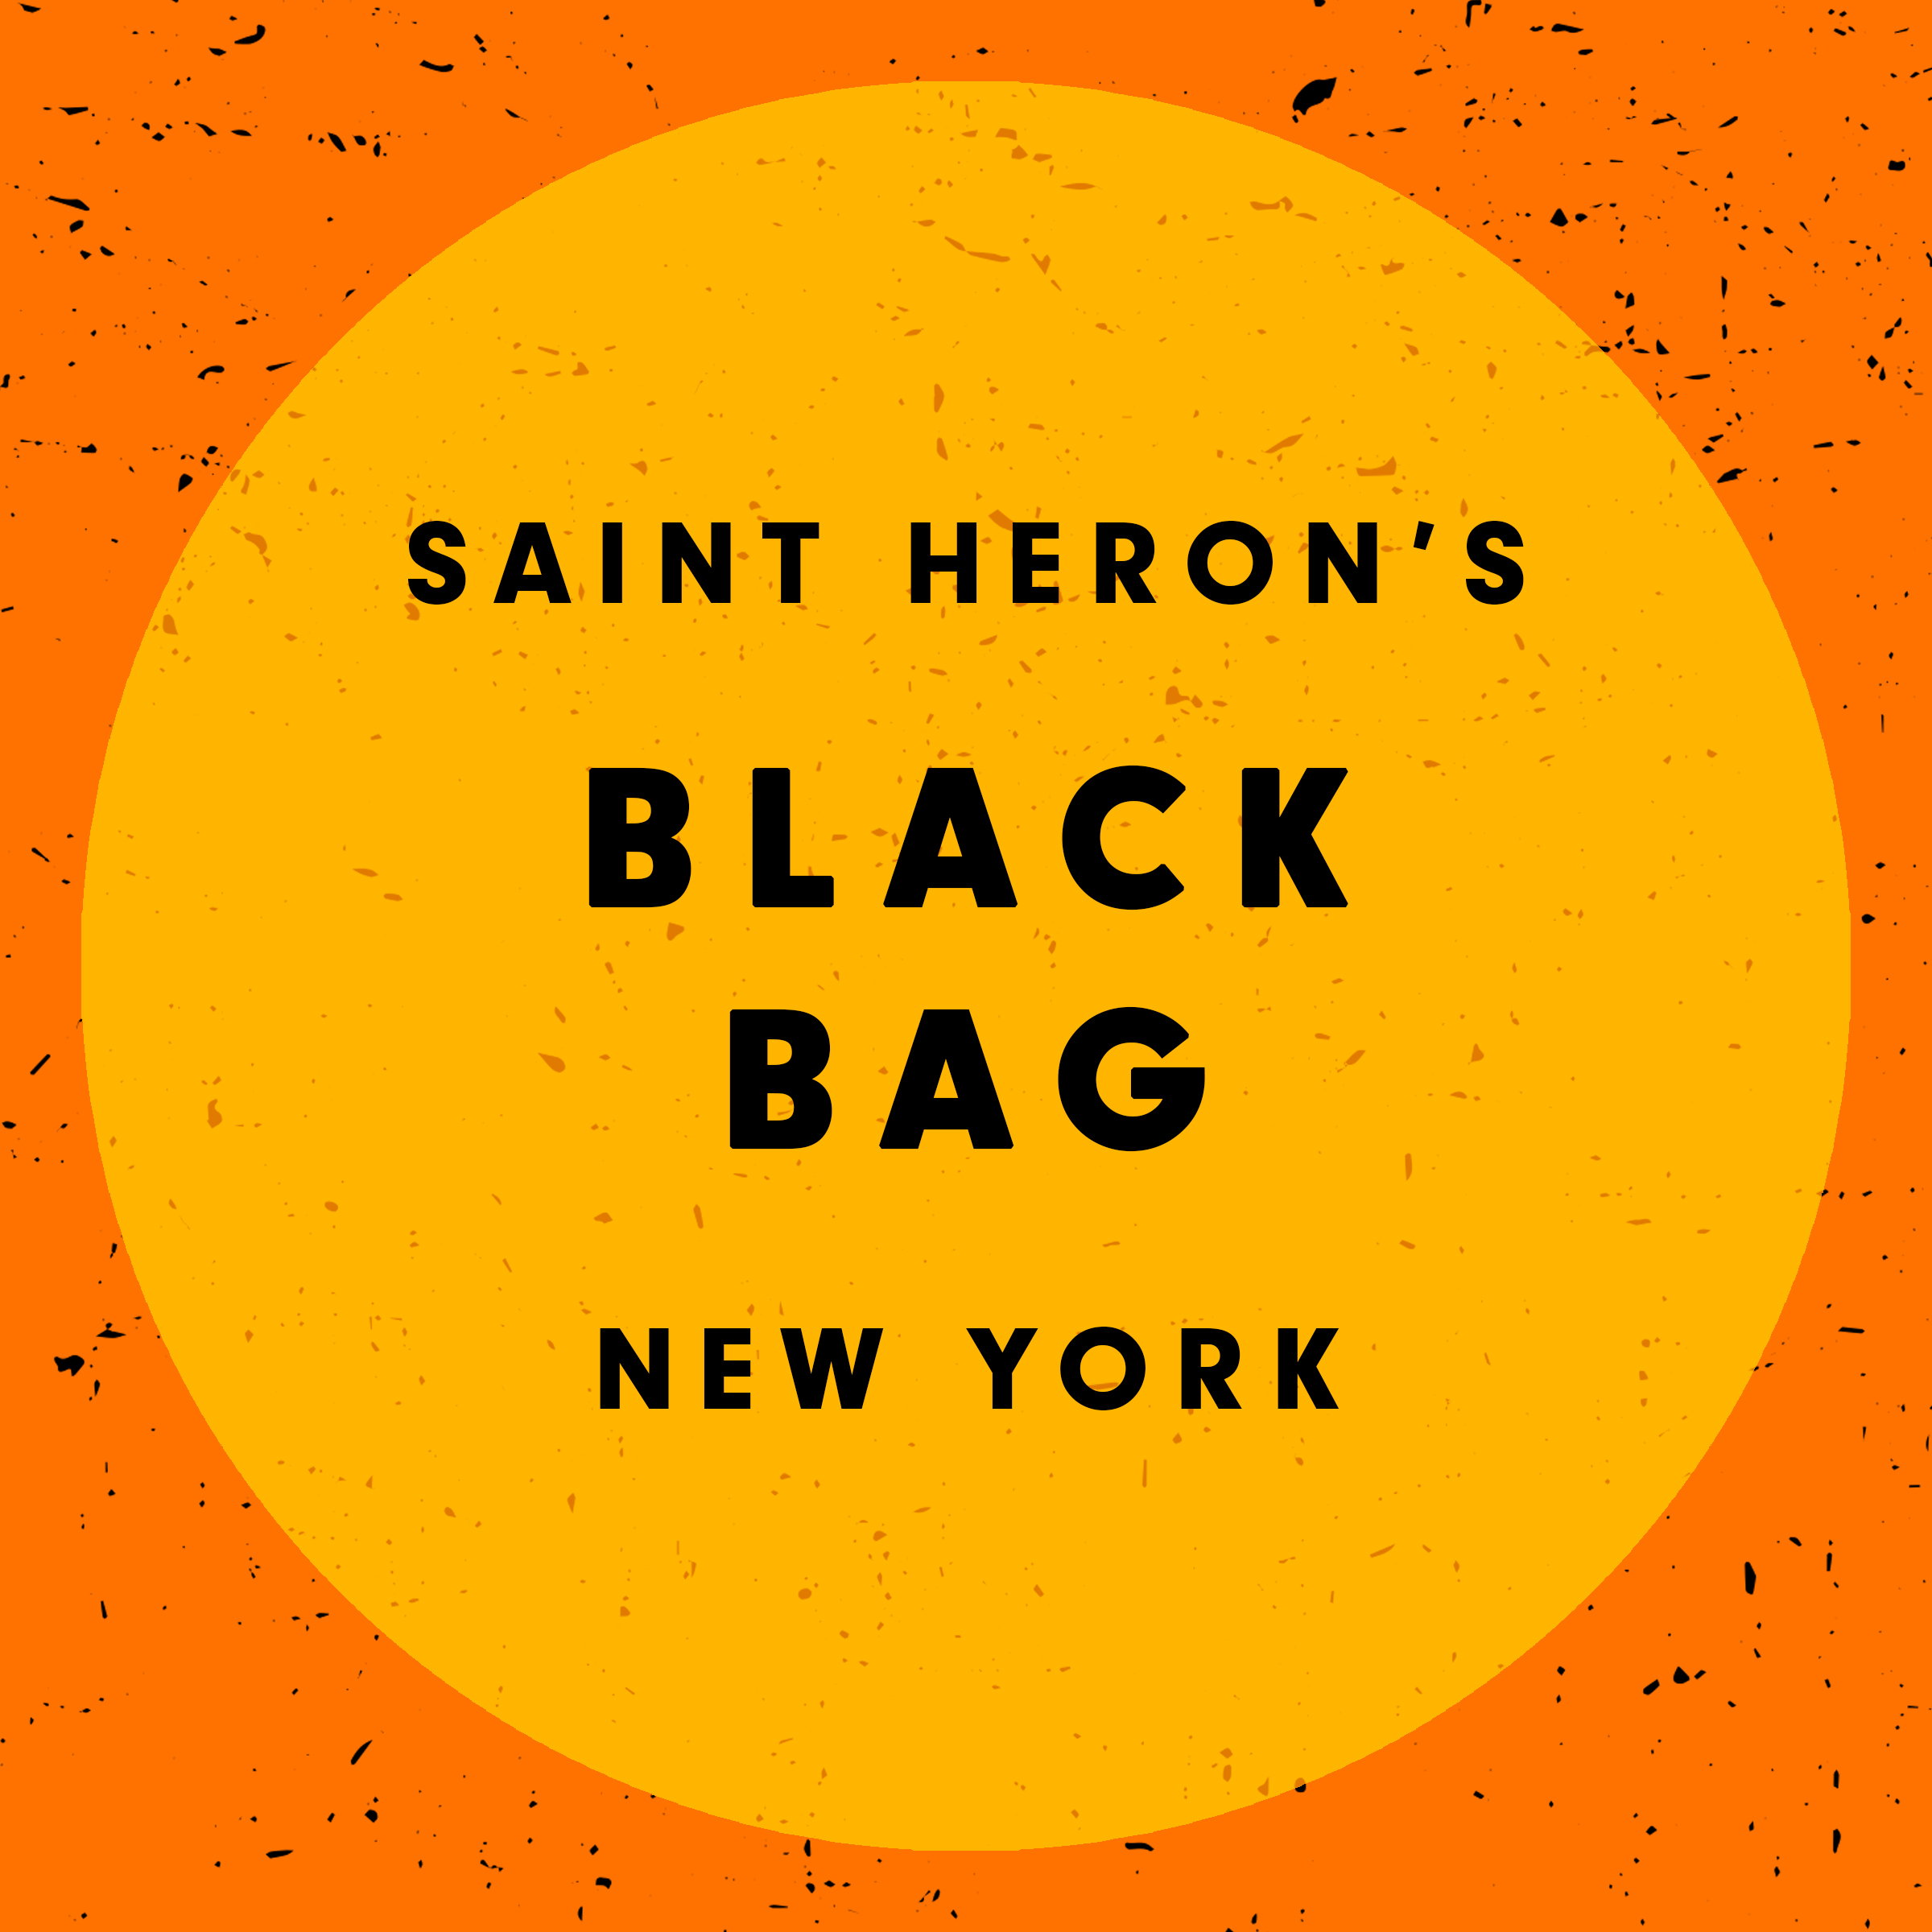 SAINT HERON’S BLACK BAG: NEW YORK EDITION - Spotlighting establishments and businesses founded and built by people of color